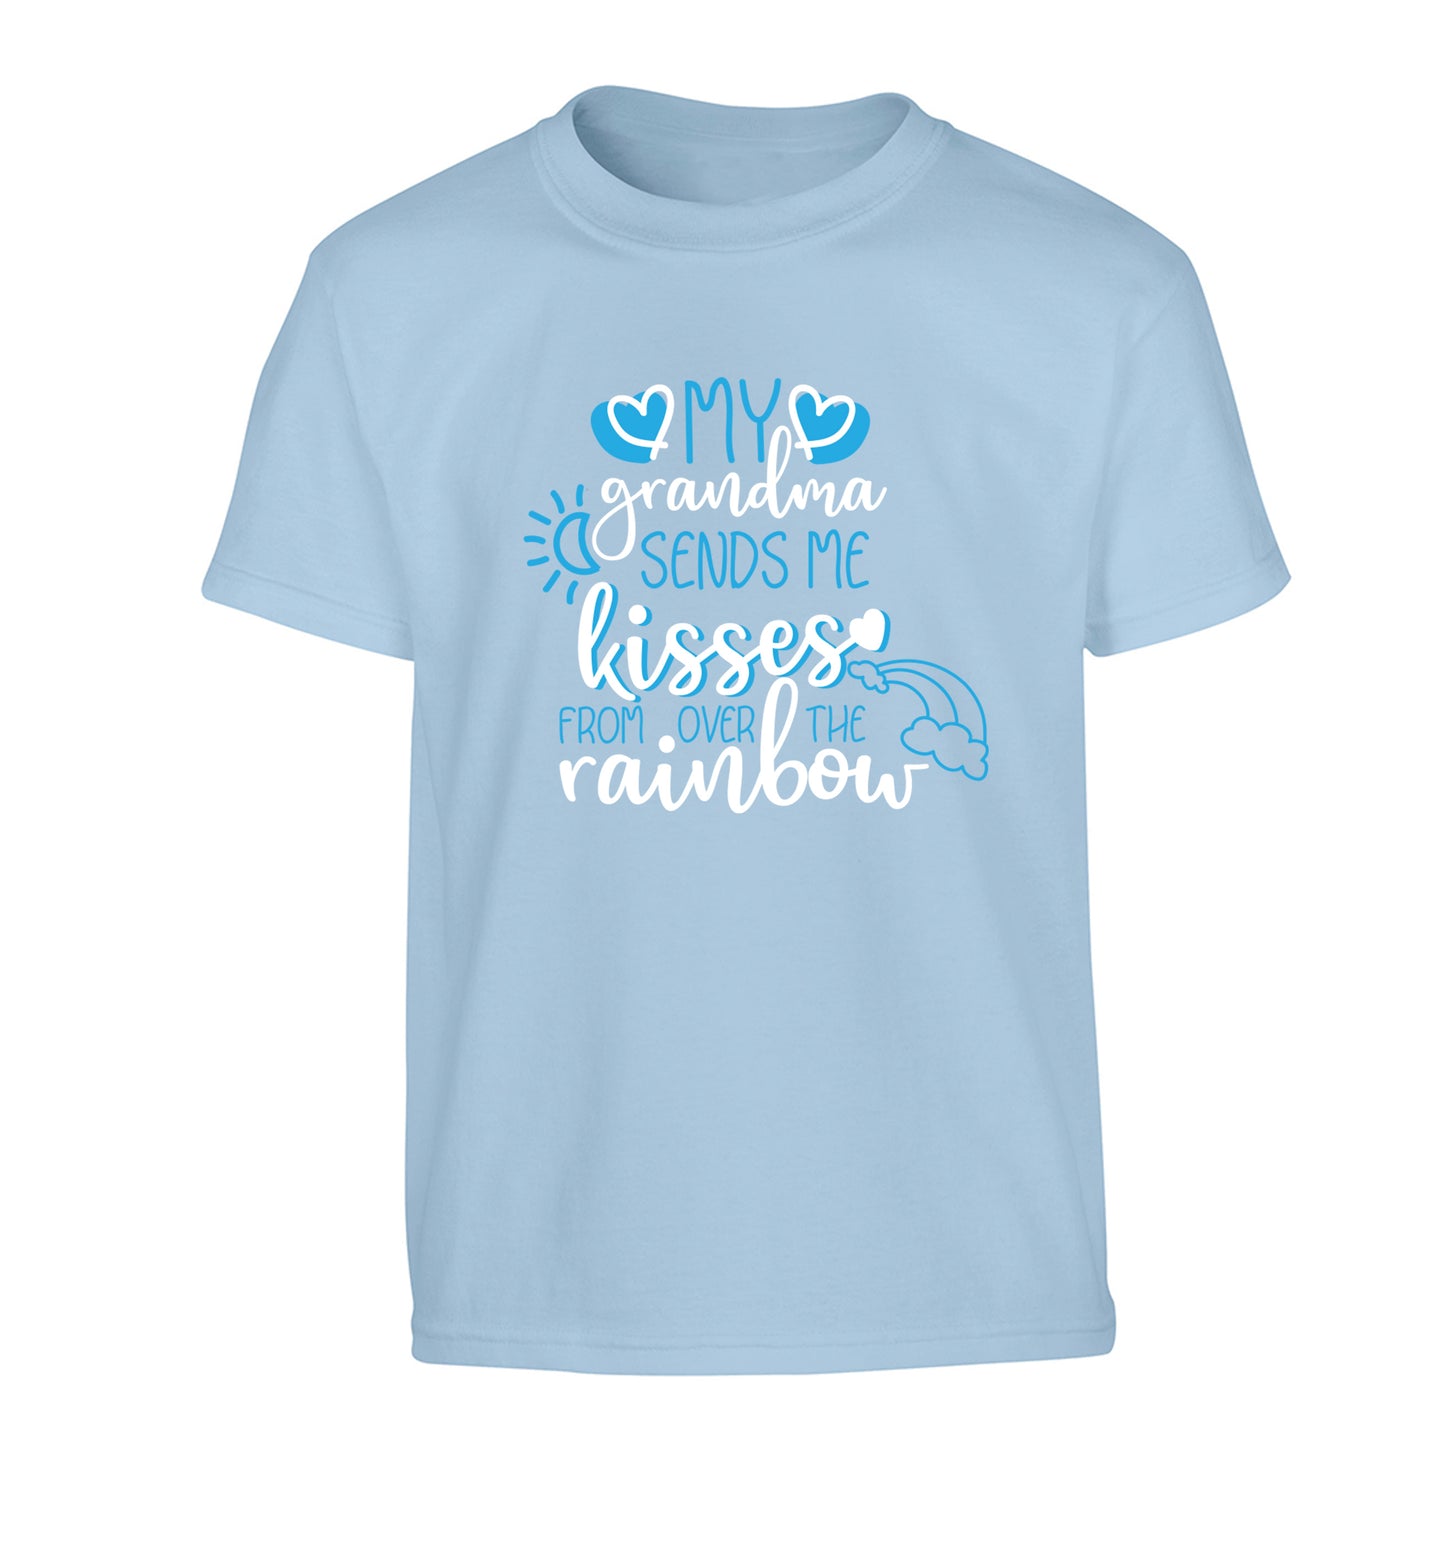 My grandma sends me kisses from over the rainbow Children's light blue Tshirt 12-13 Years